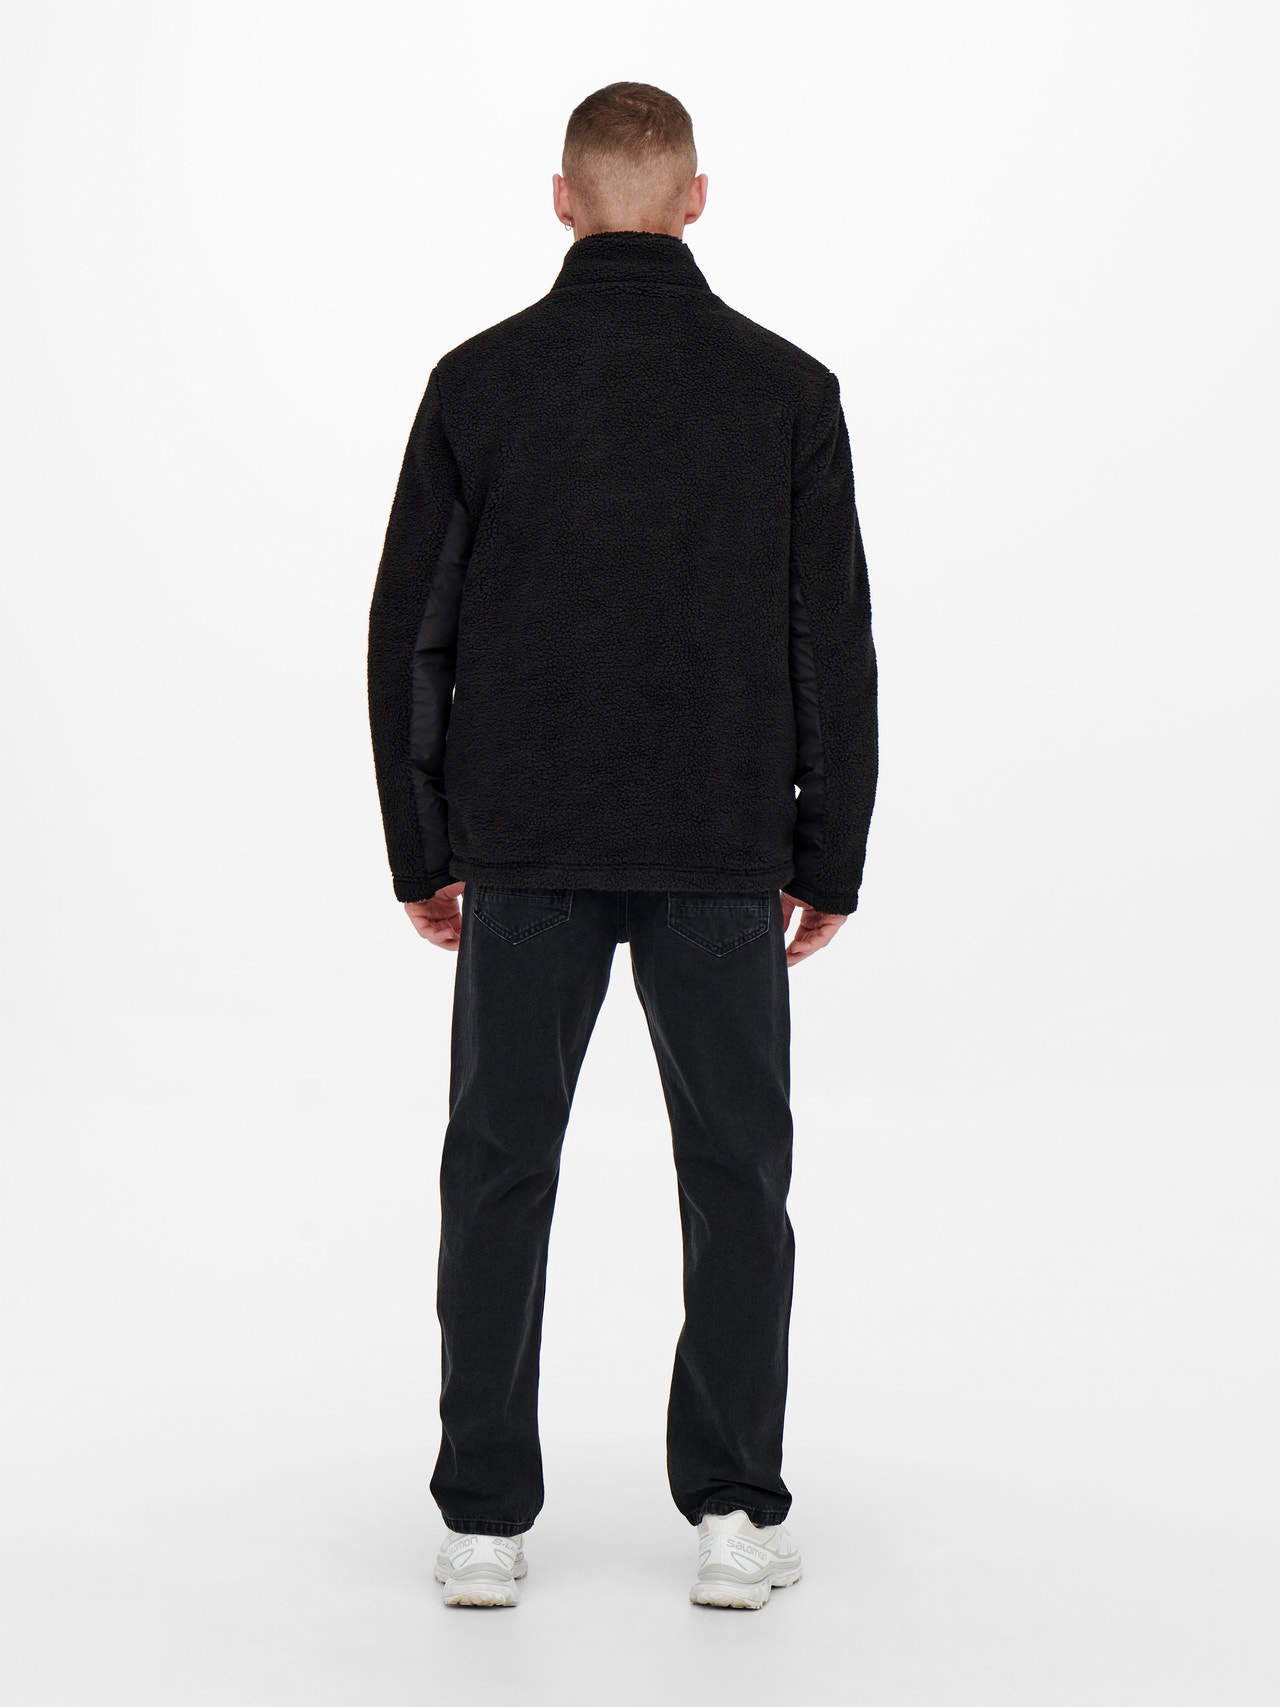 ONLY & SONS Sherpa mix jacket -Black - 22022512